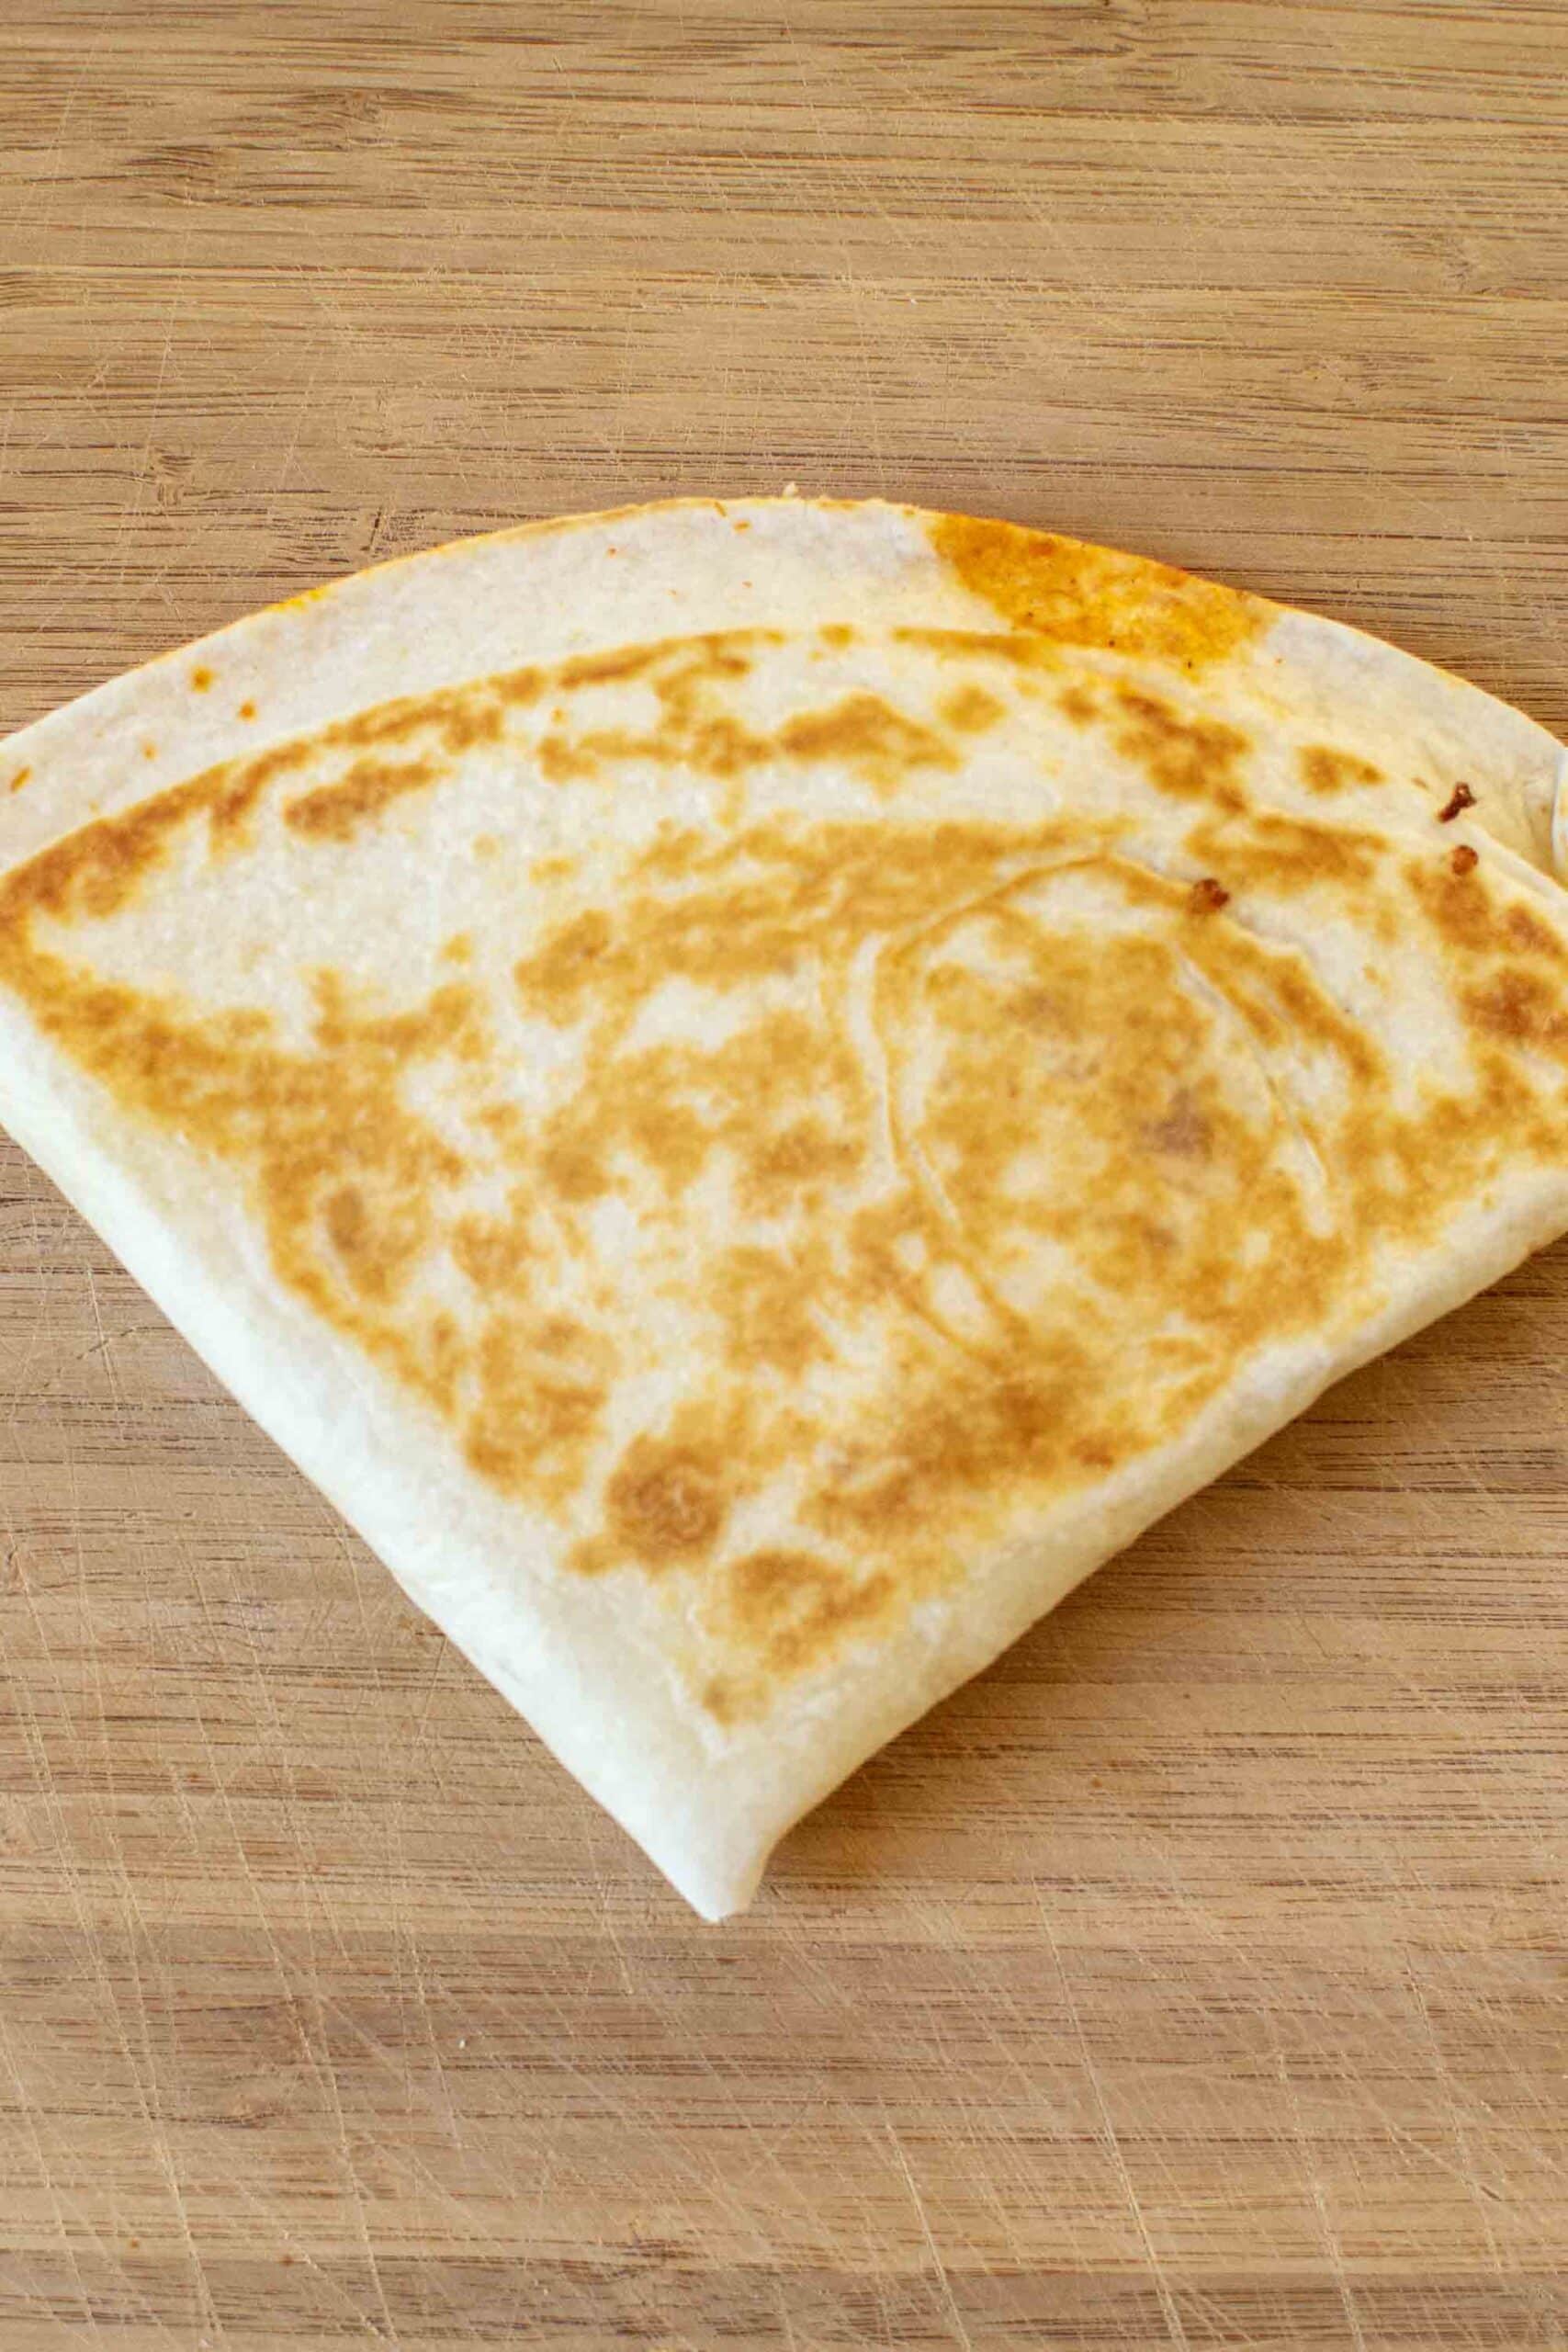 Step 5 of making a Pizza Tortilla Wrap or Pizza "Tortilla Trend." Fry it up until it's golden brown and cheese is melted.